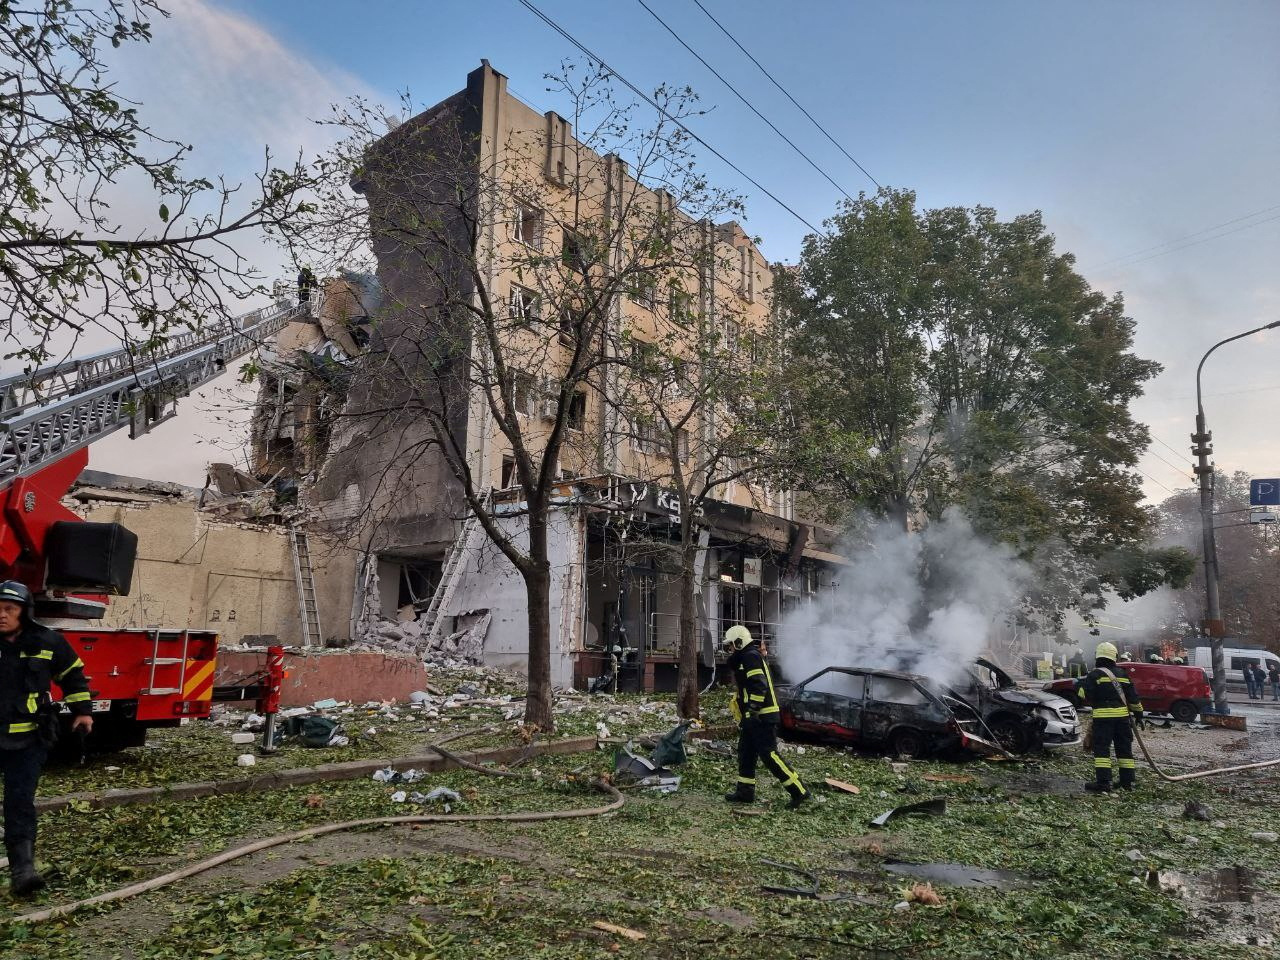 Emergency members work in the aftermath of a Russian military strike in the location given as Cherkasy